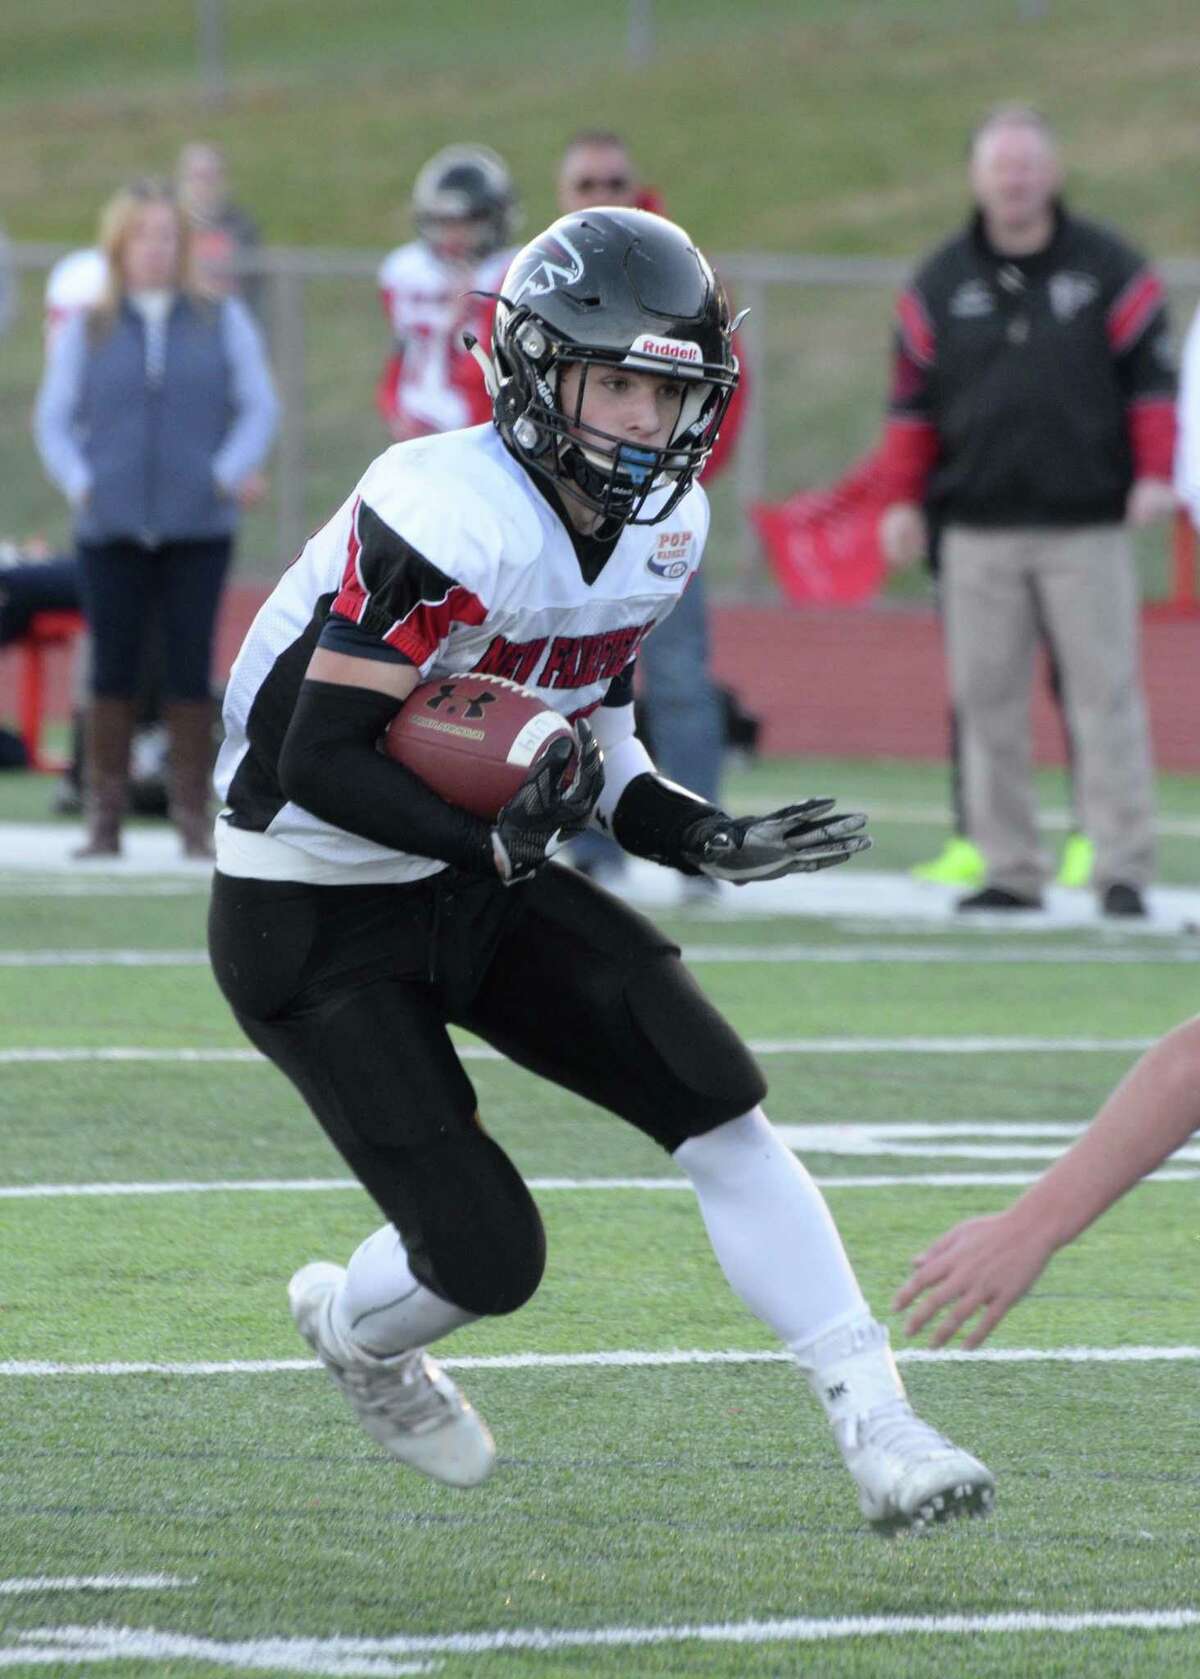 Austin Andersen of Wilton was a Captain of the New Fairfield Falcons Pop Warner football team that won the Division III U14 Unlimited National Championship with a 30-0 victory over the East Cleveland (OH) Chiefs last month.